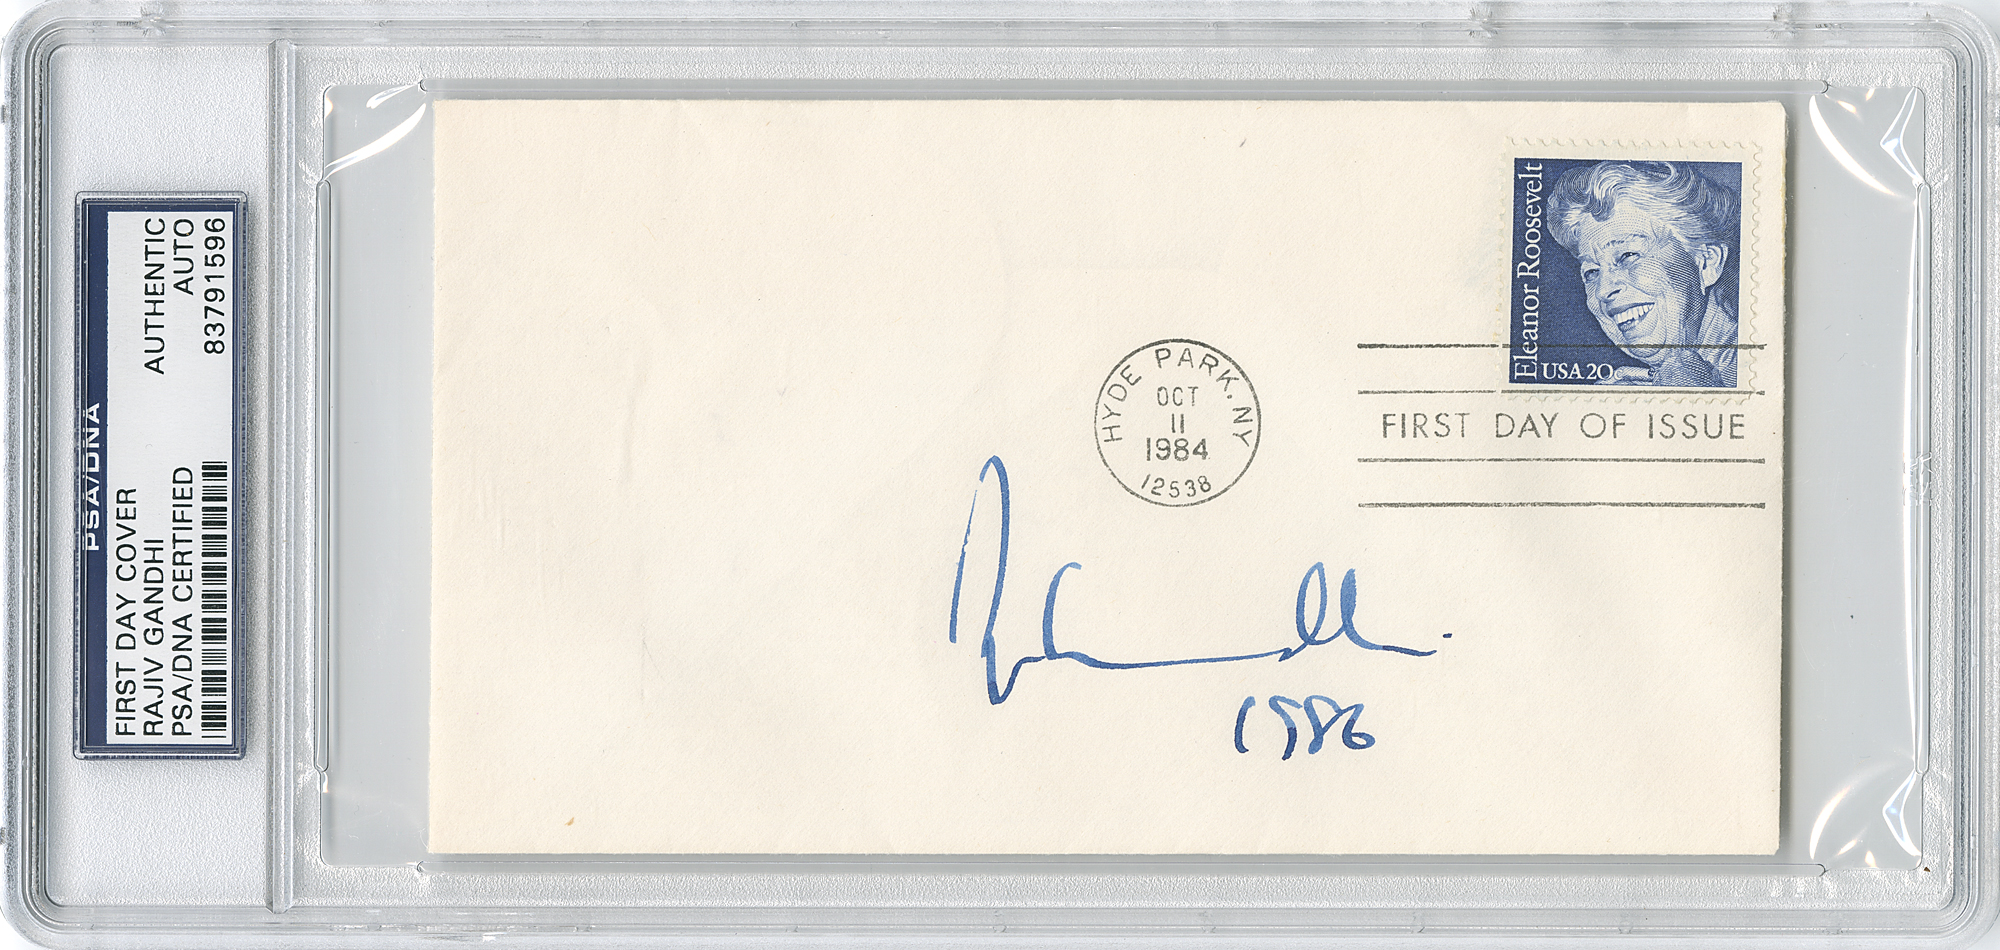 Lot #381 Rajiv Gandhi Signed First Day Cover